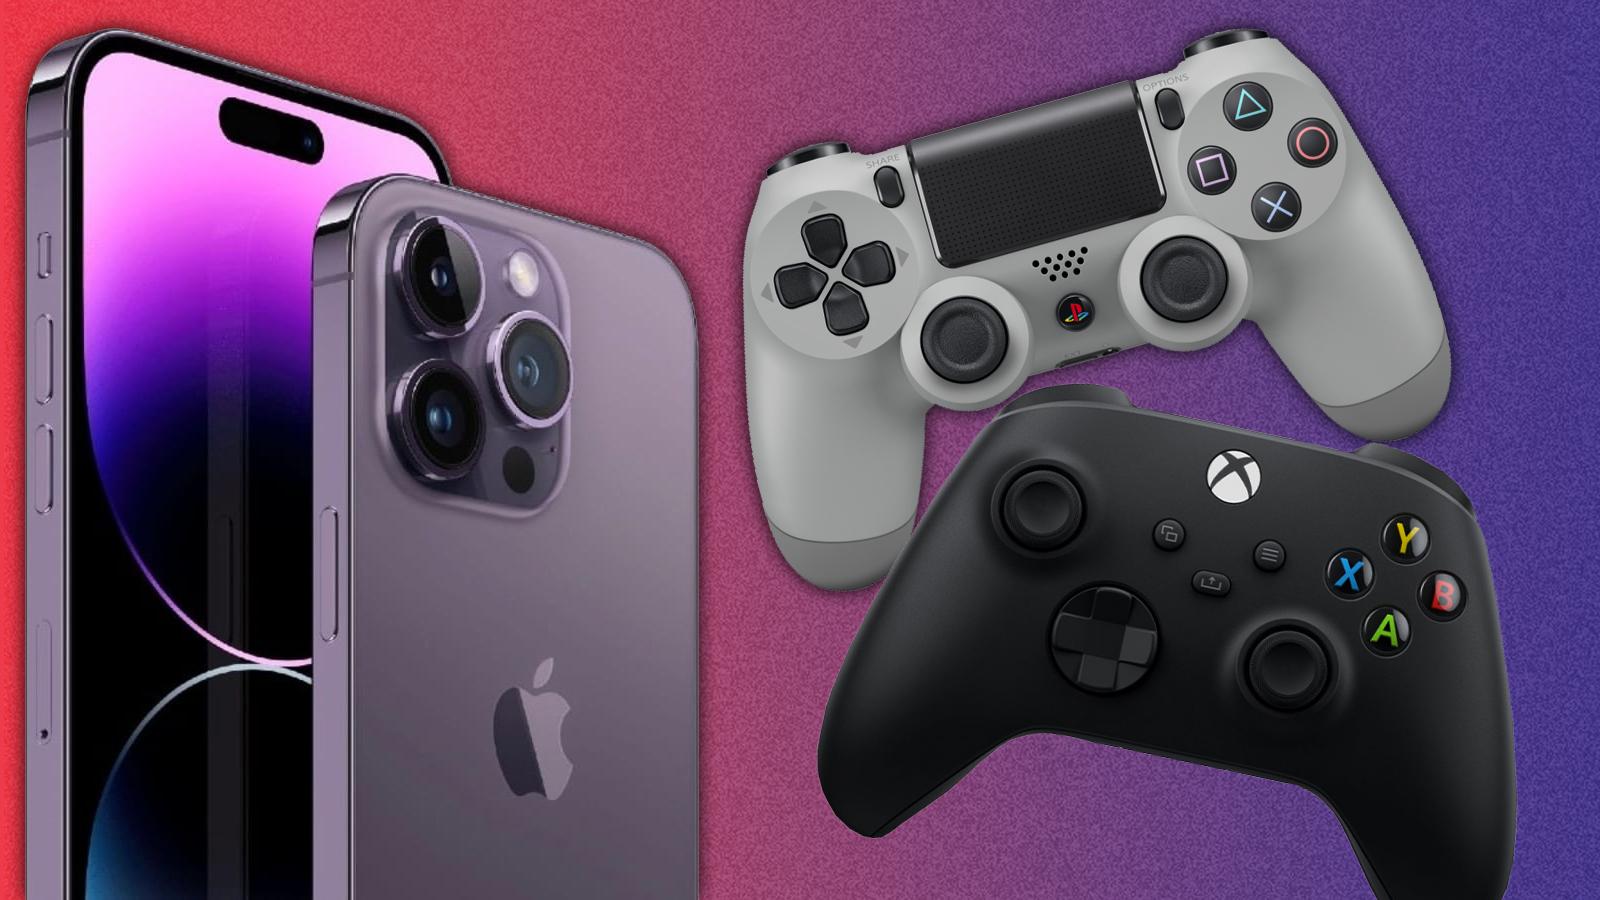 New BACKBONE ONE USB-C iPhone/Android controller drops to $75 for